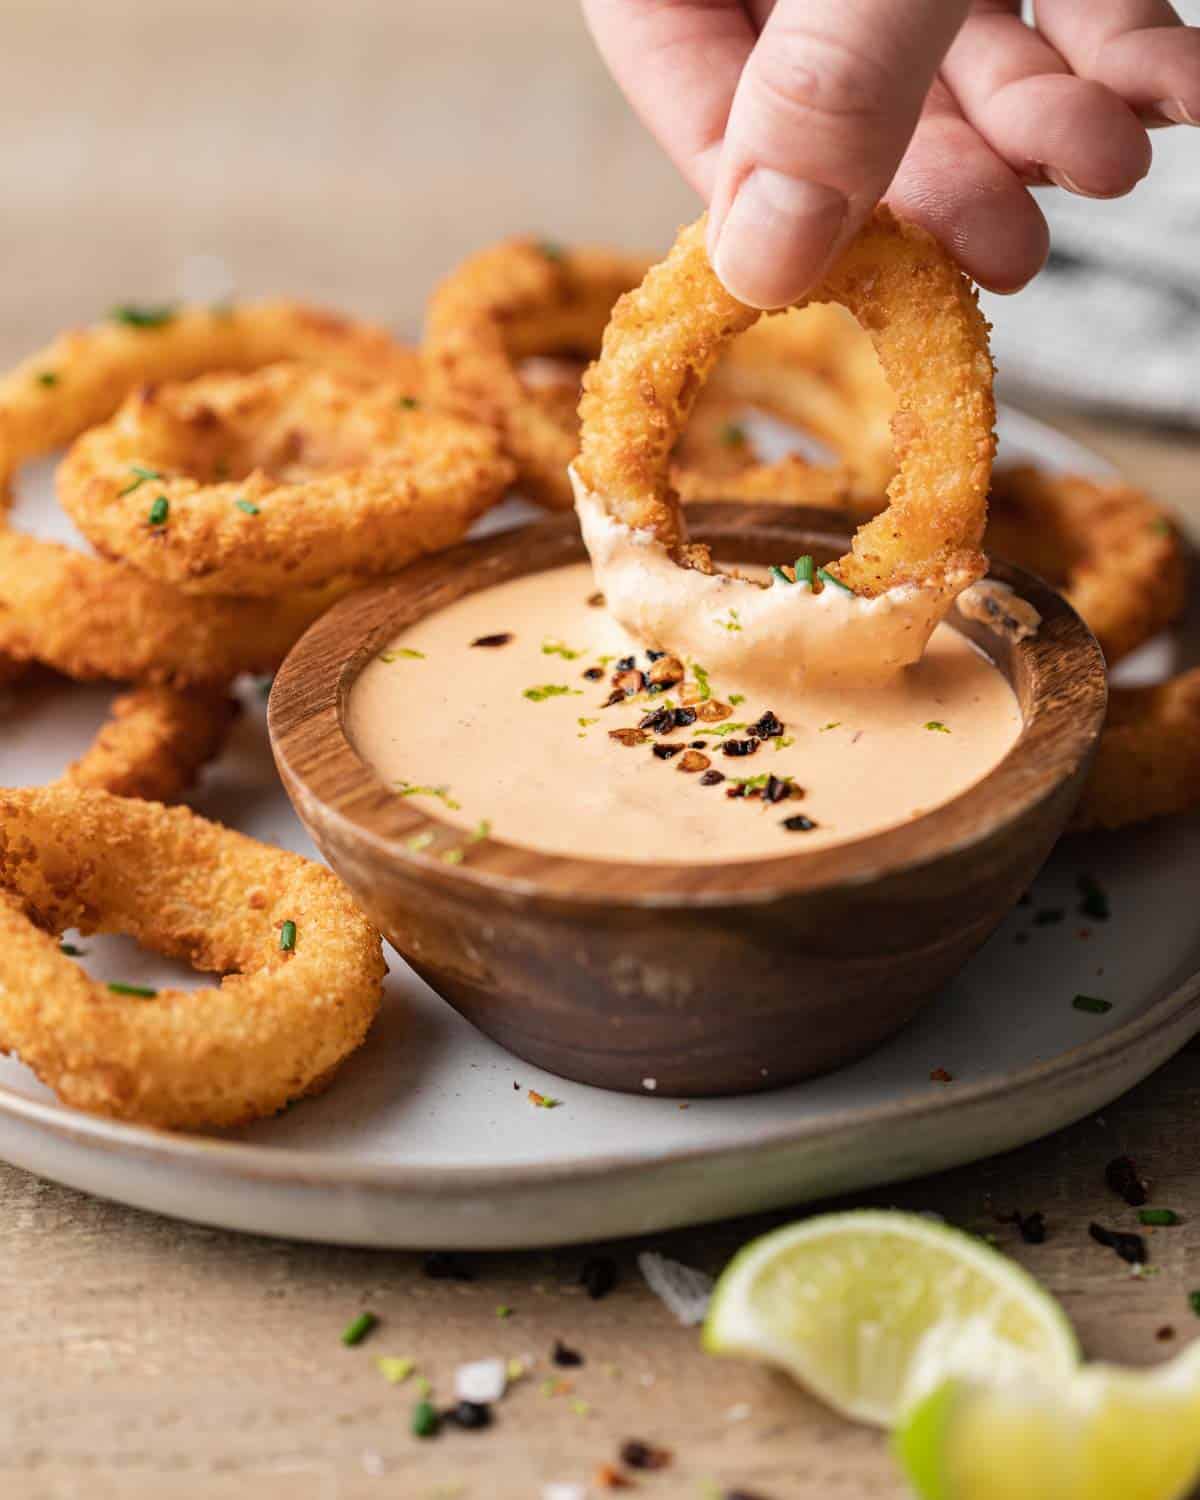 Dipping fried onion rings into a bowl of chipotle crema sauce